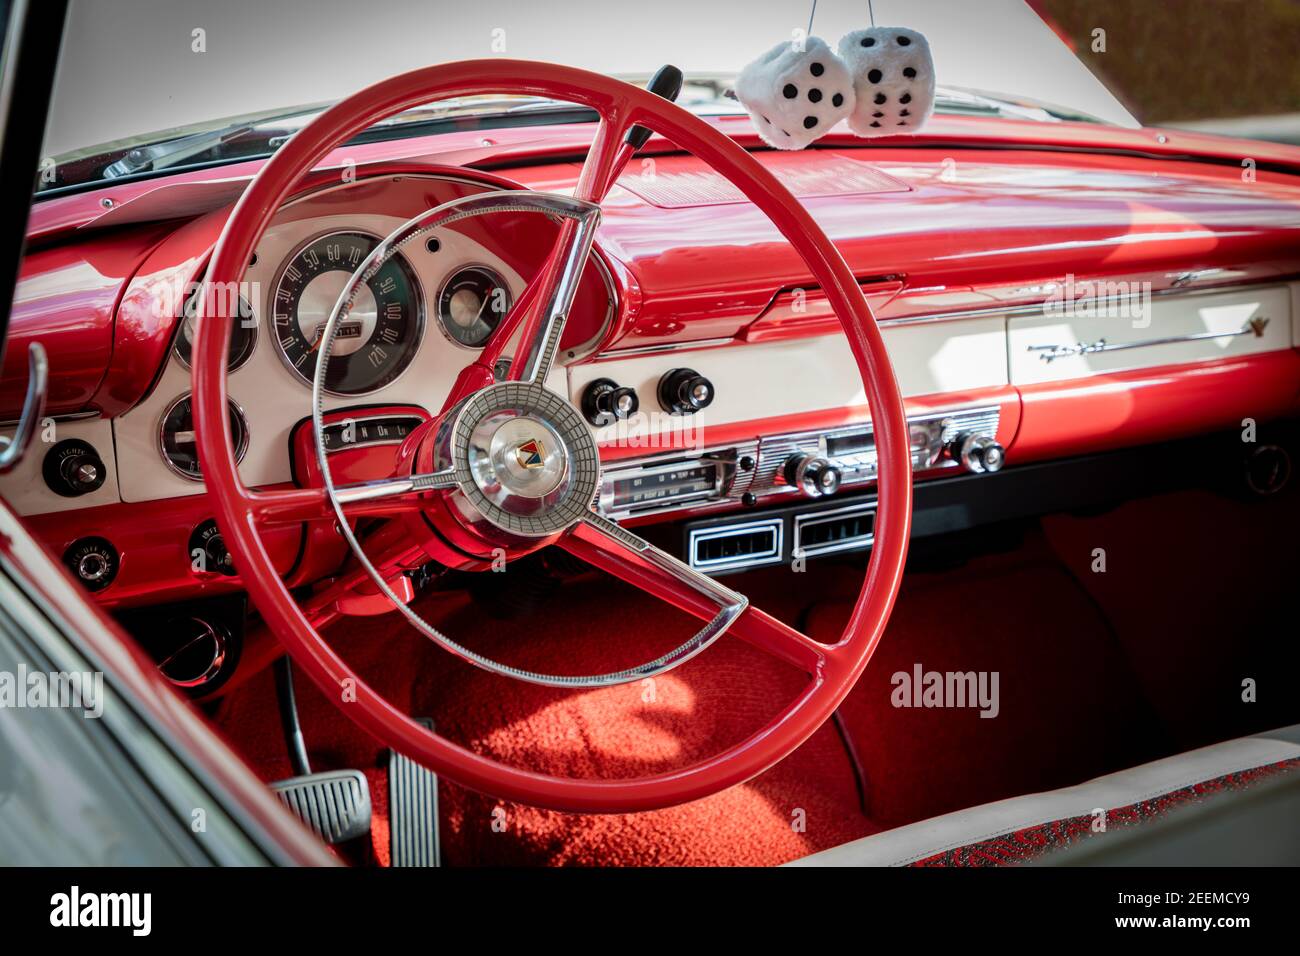 1956 Ford Fairlane on display at 'Cars on Fifth' - Naples, Florida, USA Stock Photo